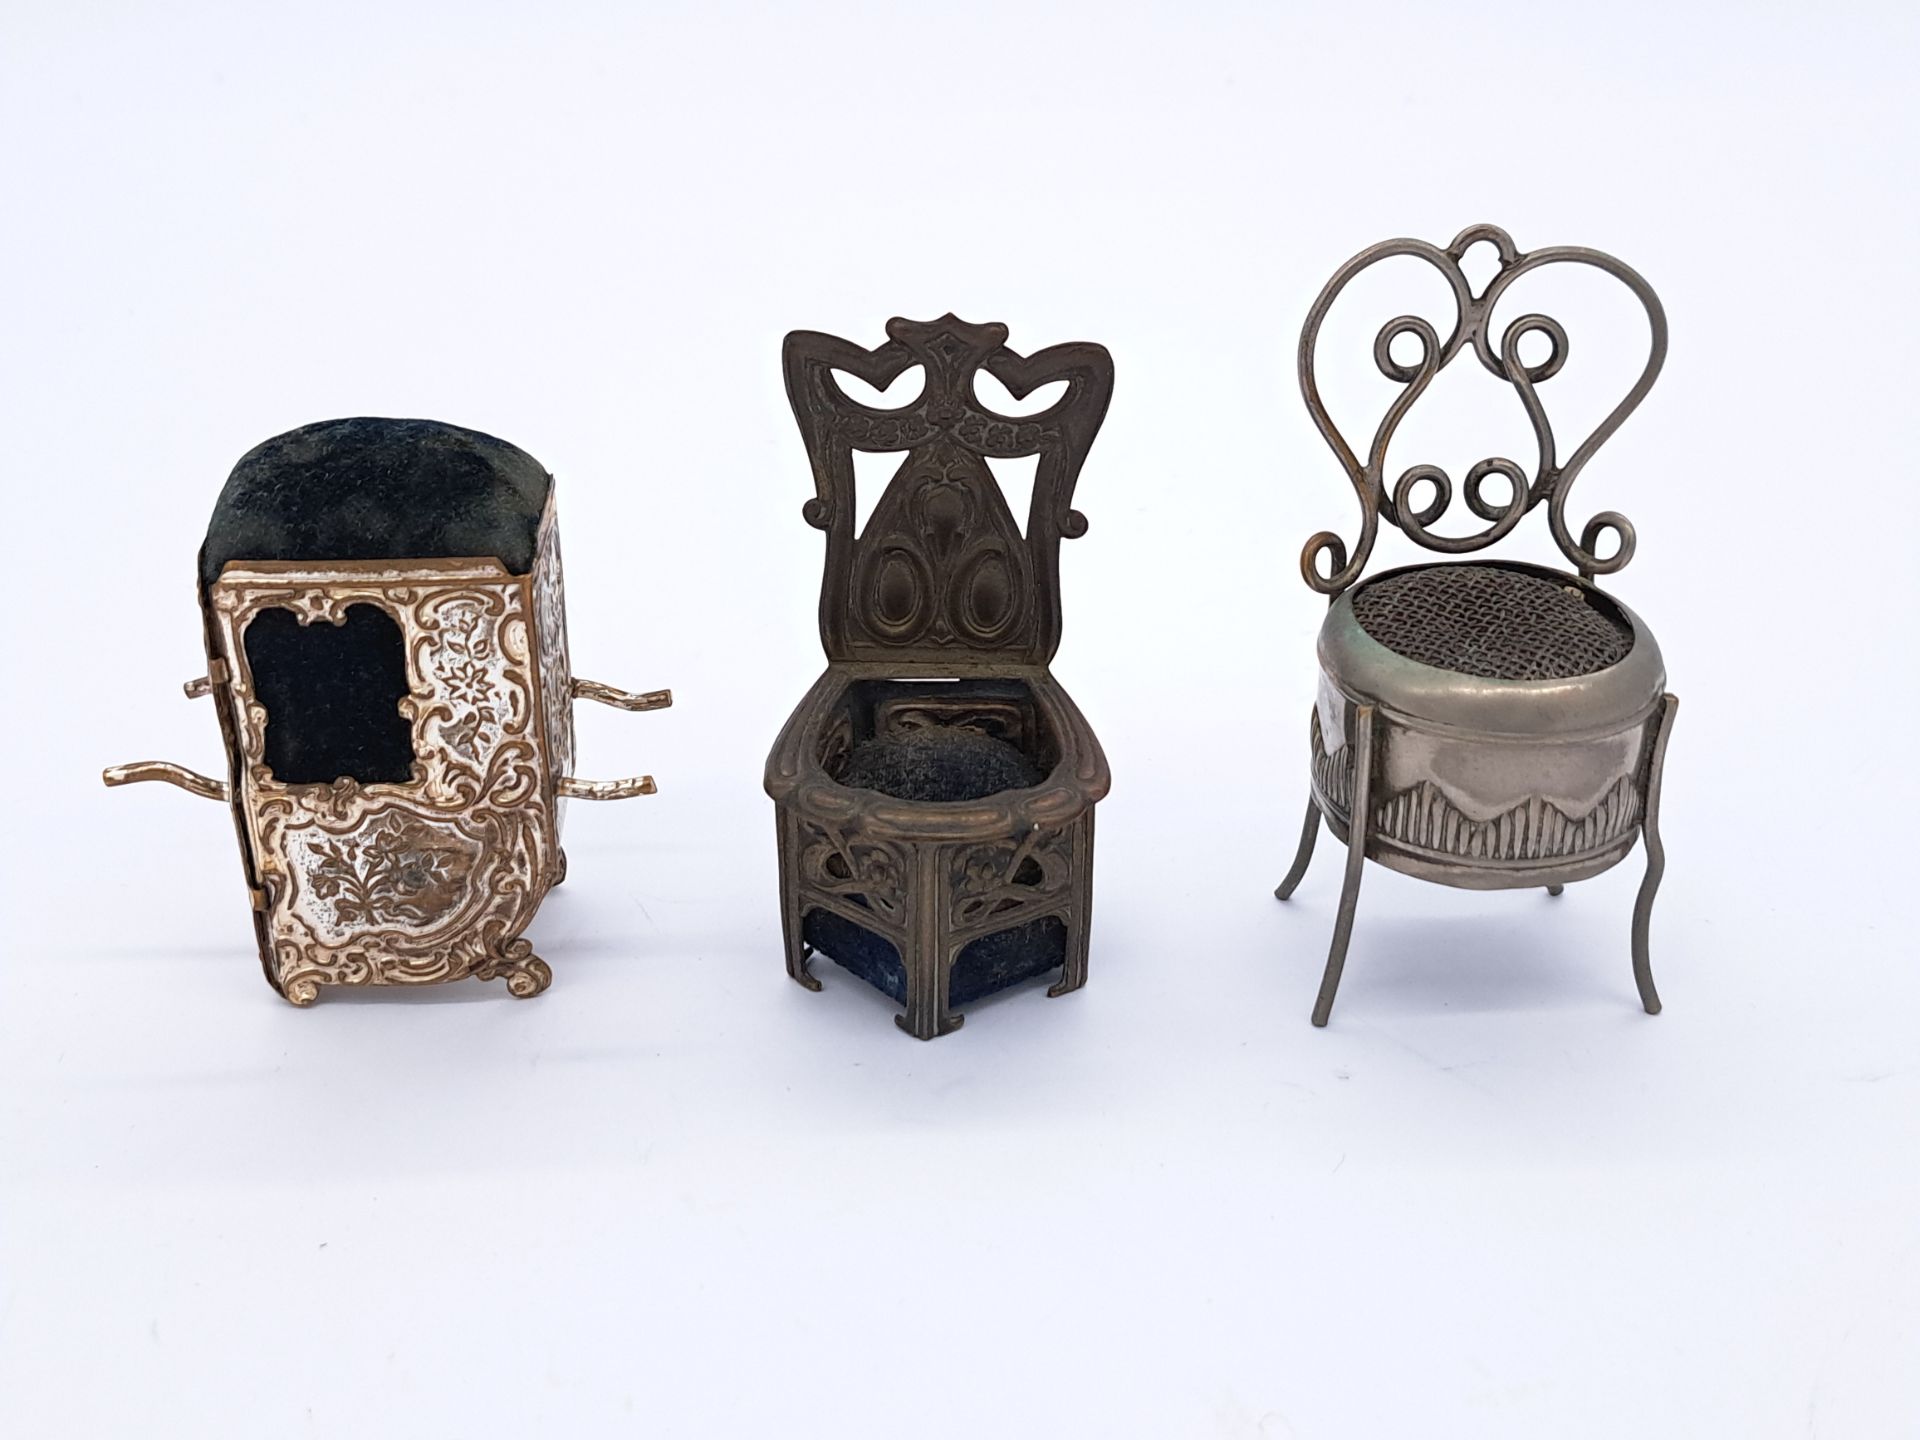 Miniature cast metal and other doll's house furniture / novelties